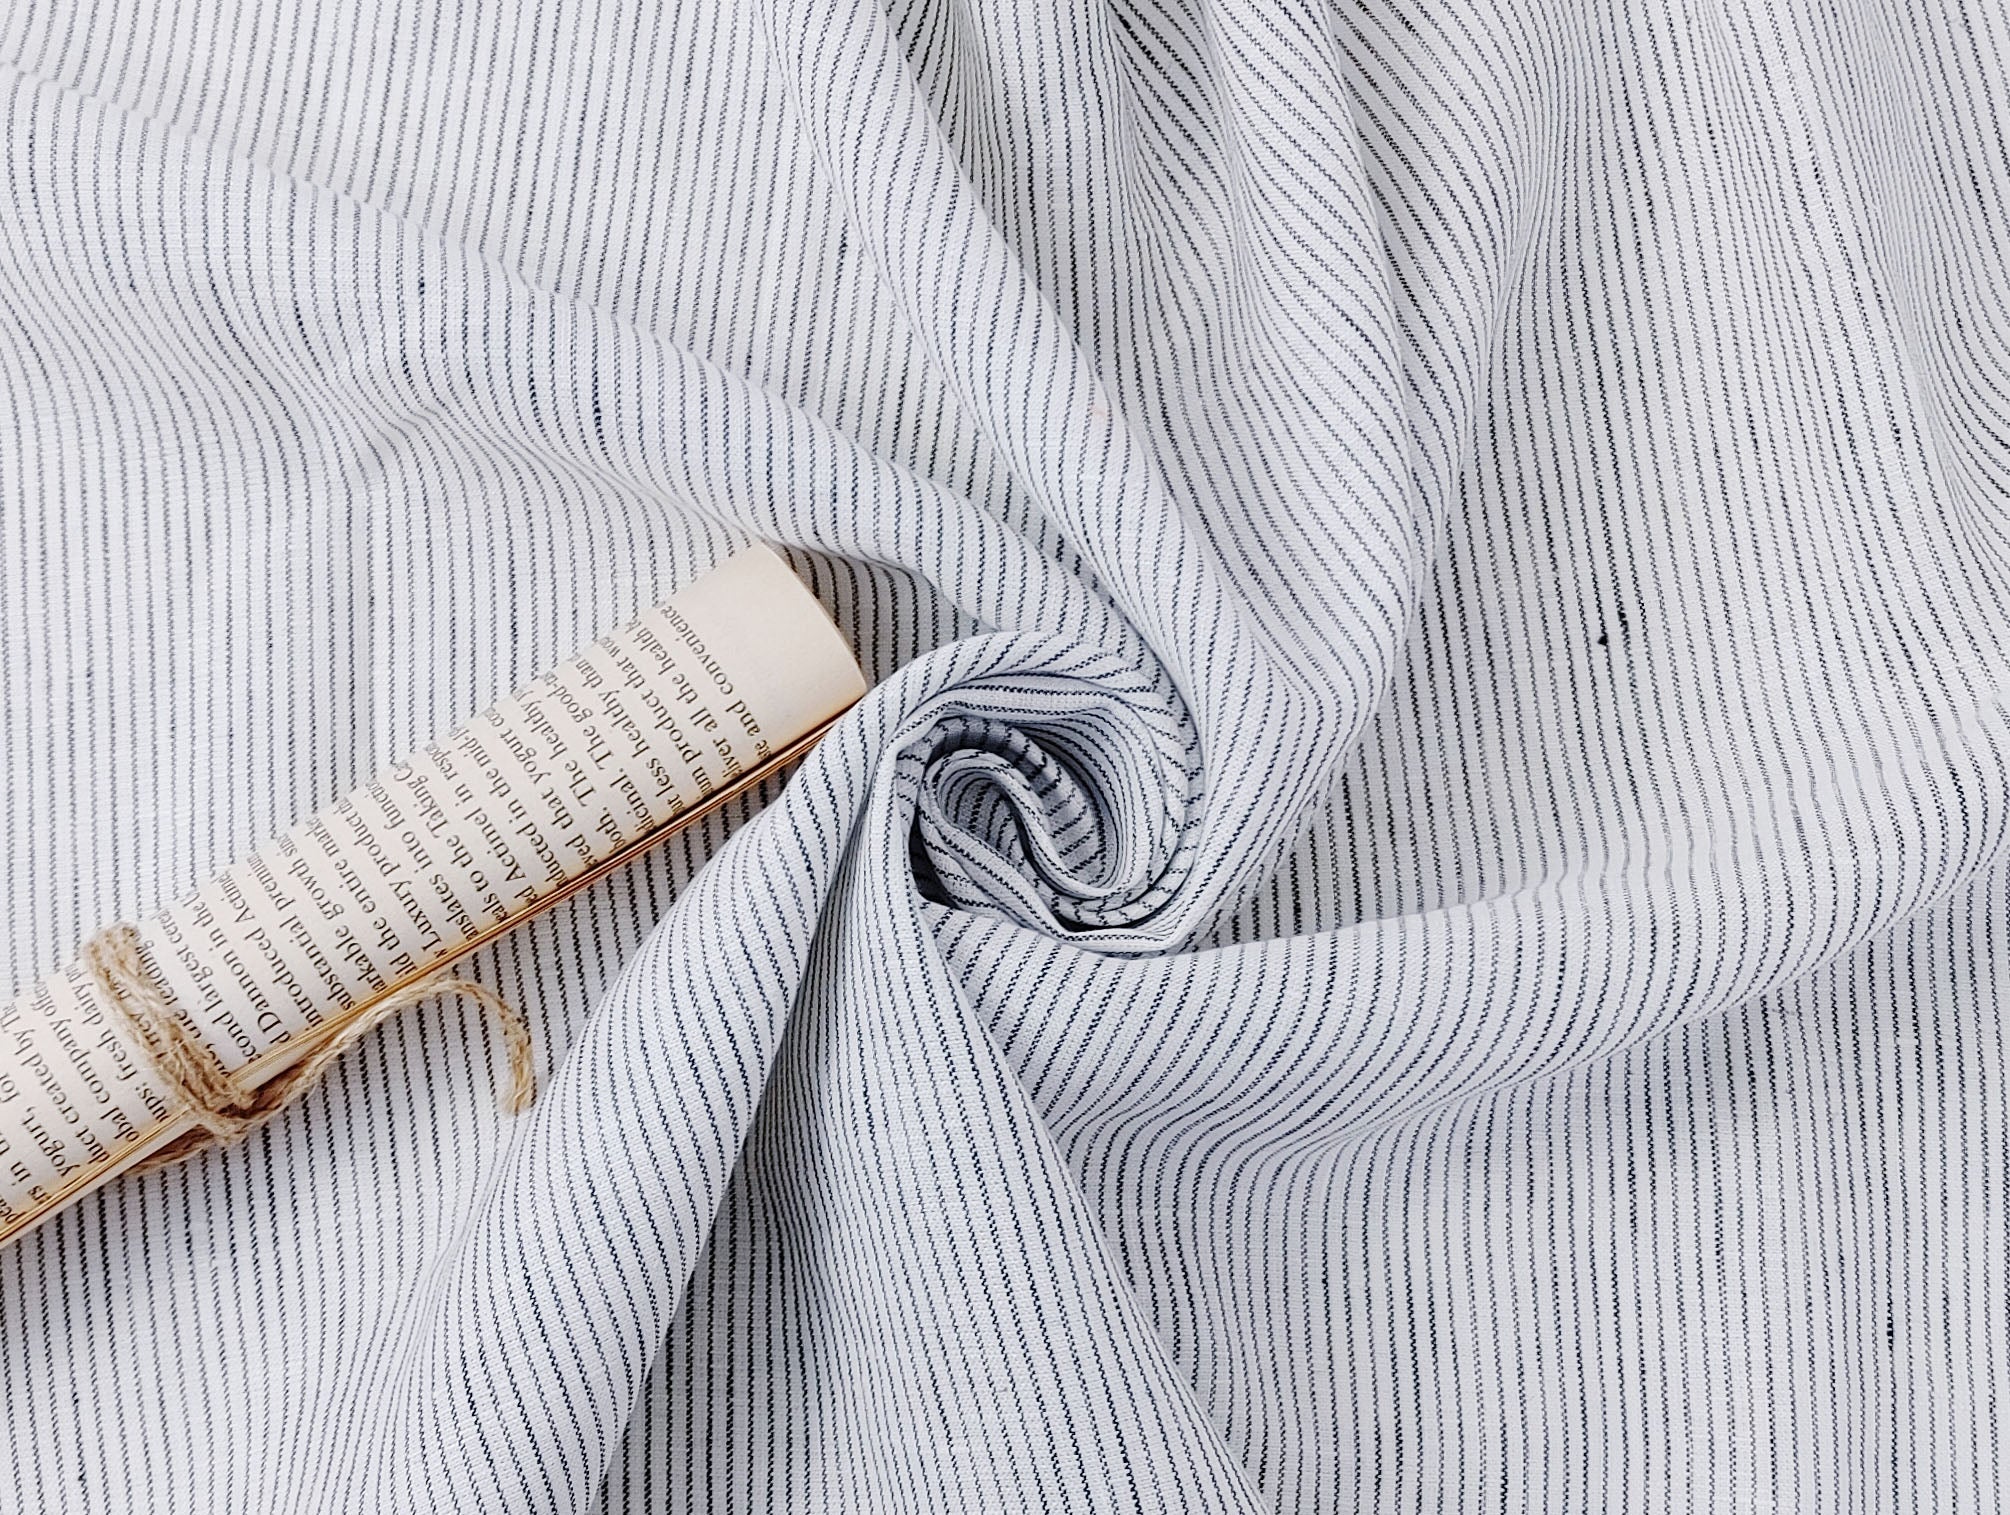 100% Linen Navy Striped White Fabric – Light and Timeless 7853 - The Linen Lab - Navy